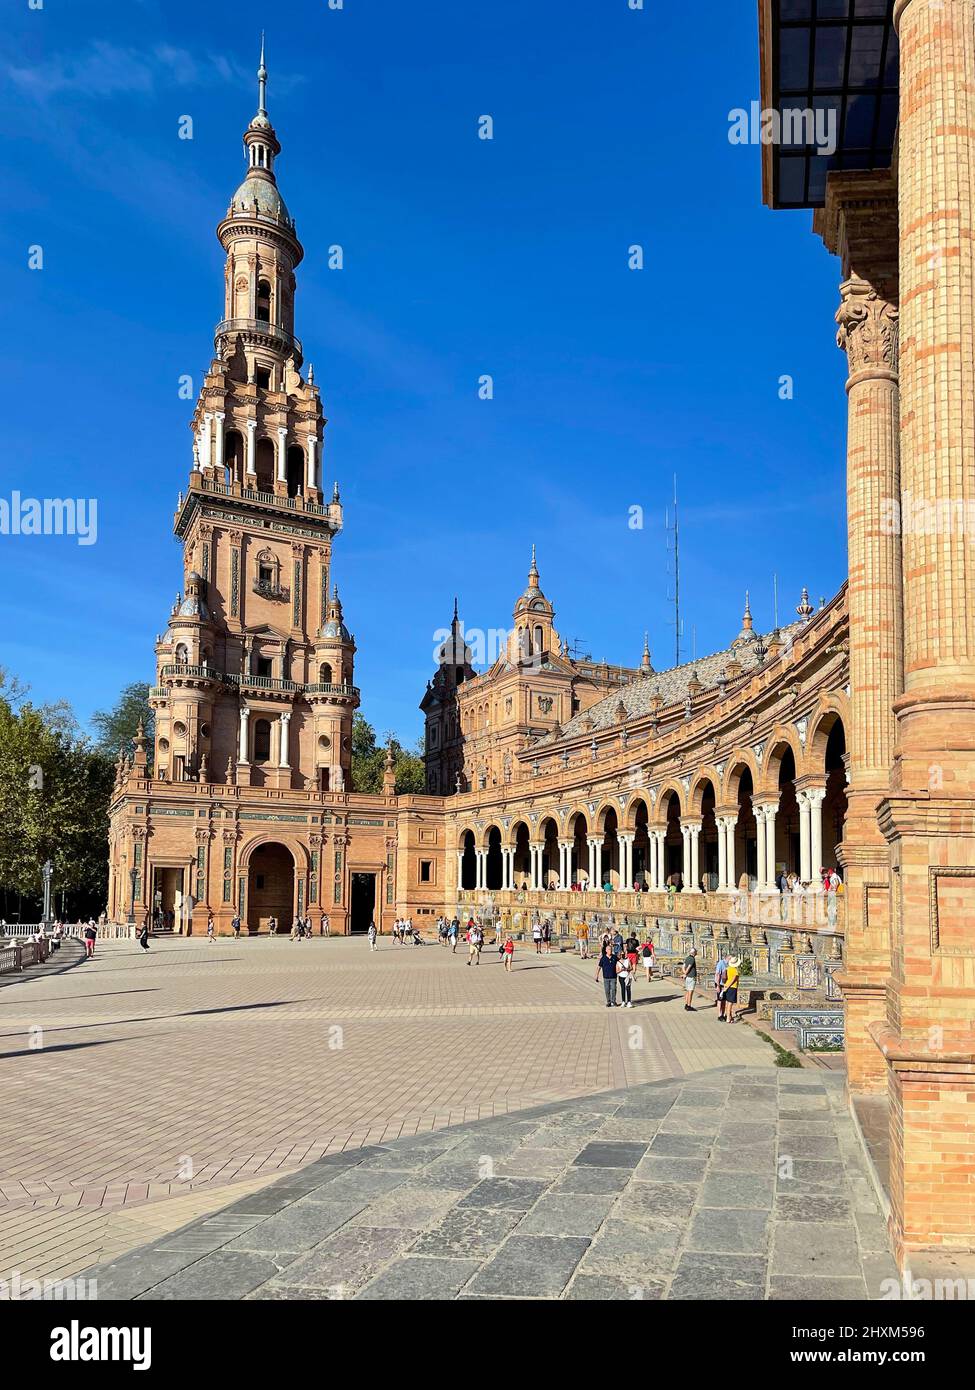 The Plaza de España square, the main square of the Old Town in Seville city, also Sevilla, capital of Andalusia region, in the southern Spain. Stock Photo